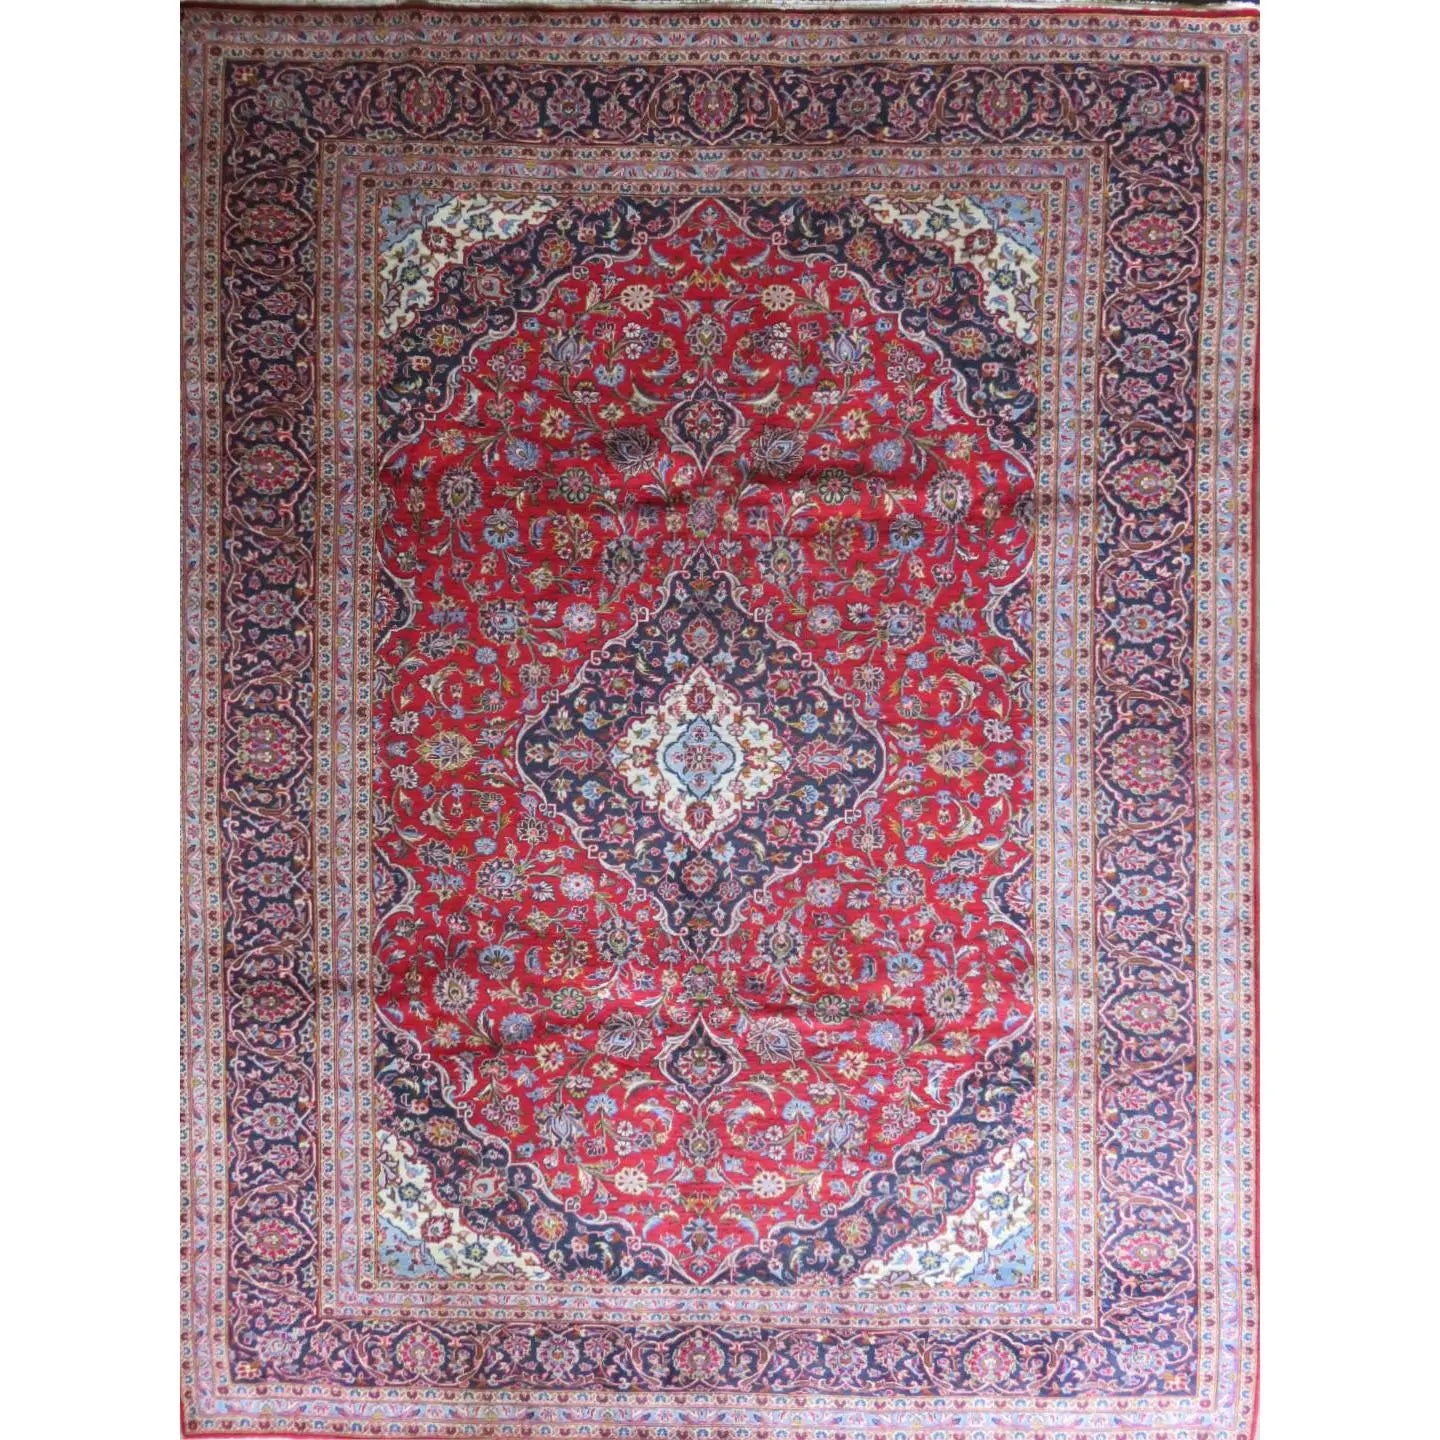 Hand-Knotted Vintage Rug 13'1" x 9'8"